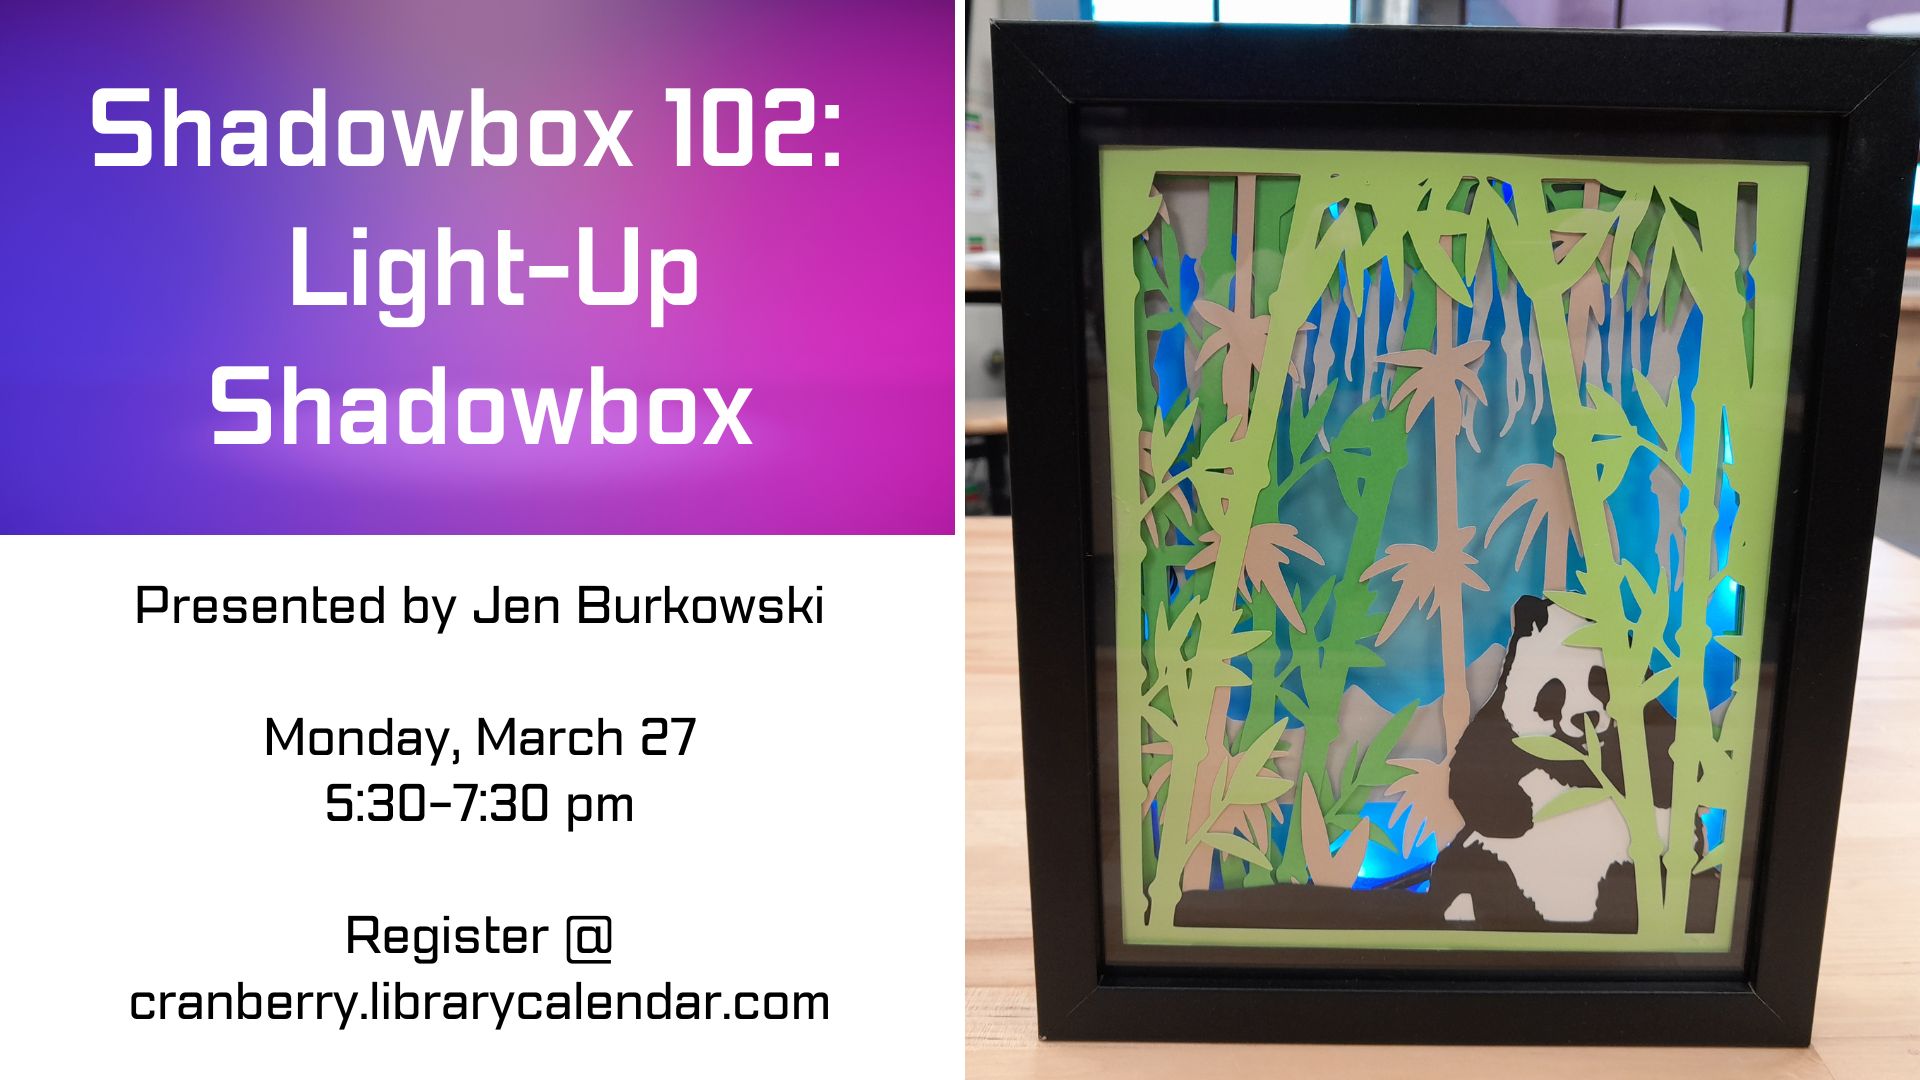 Flyer with an image of a light-up shadowbox